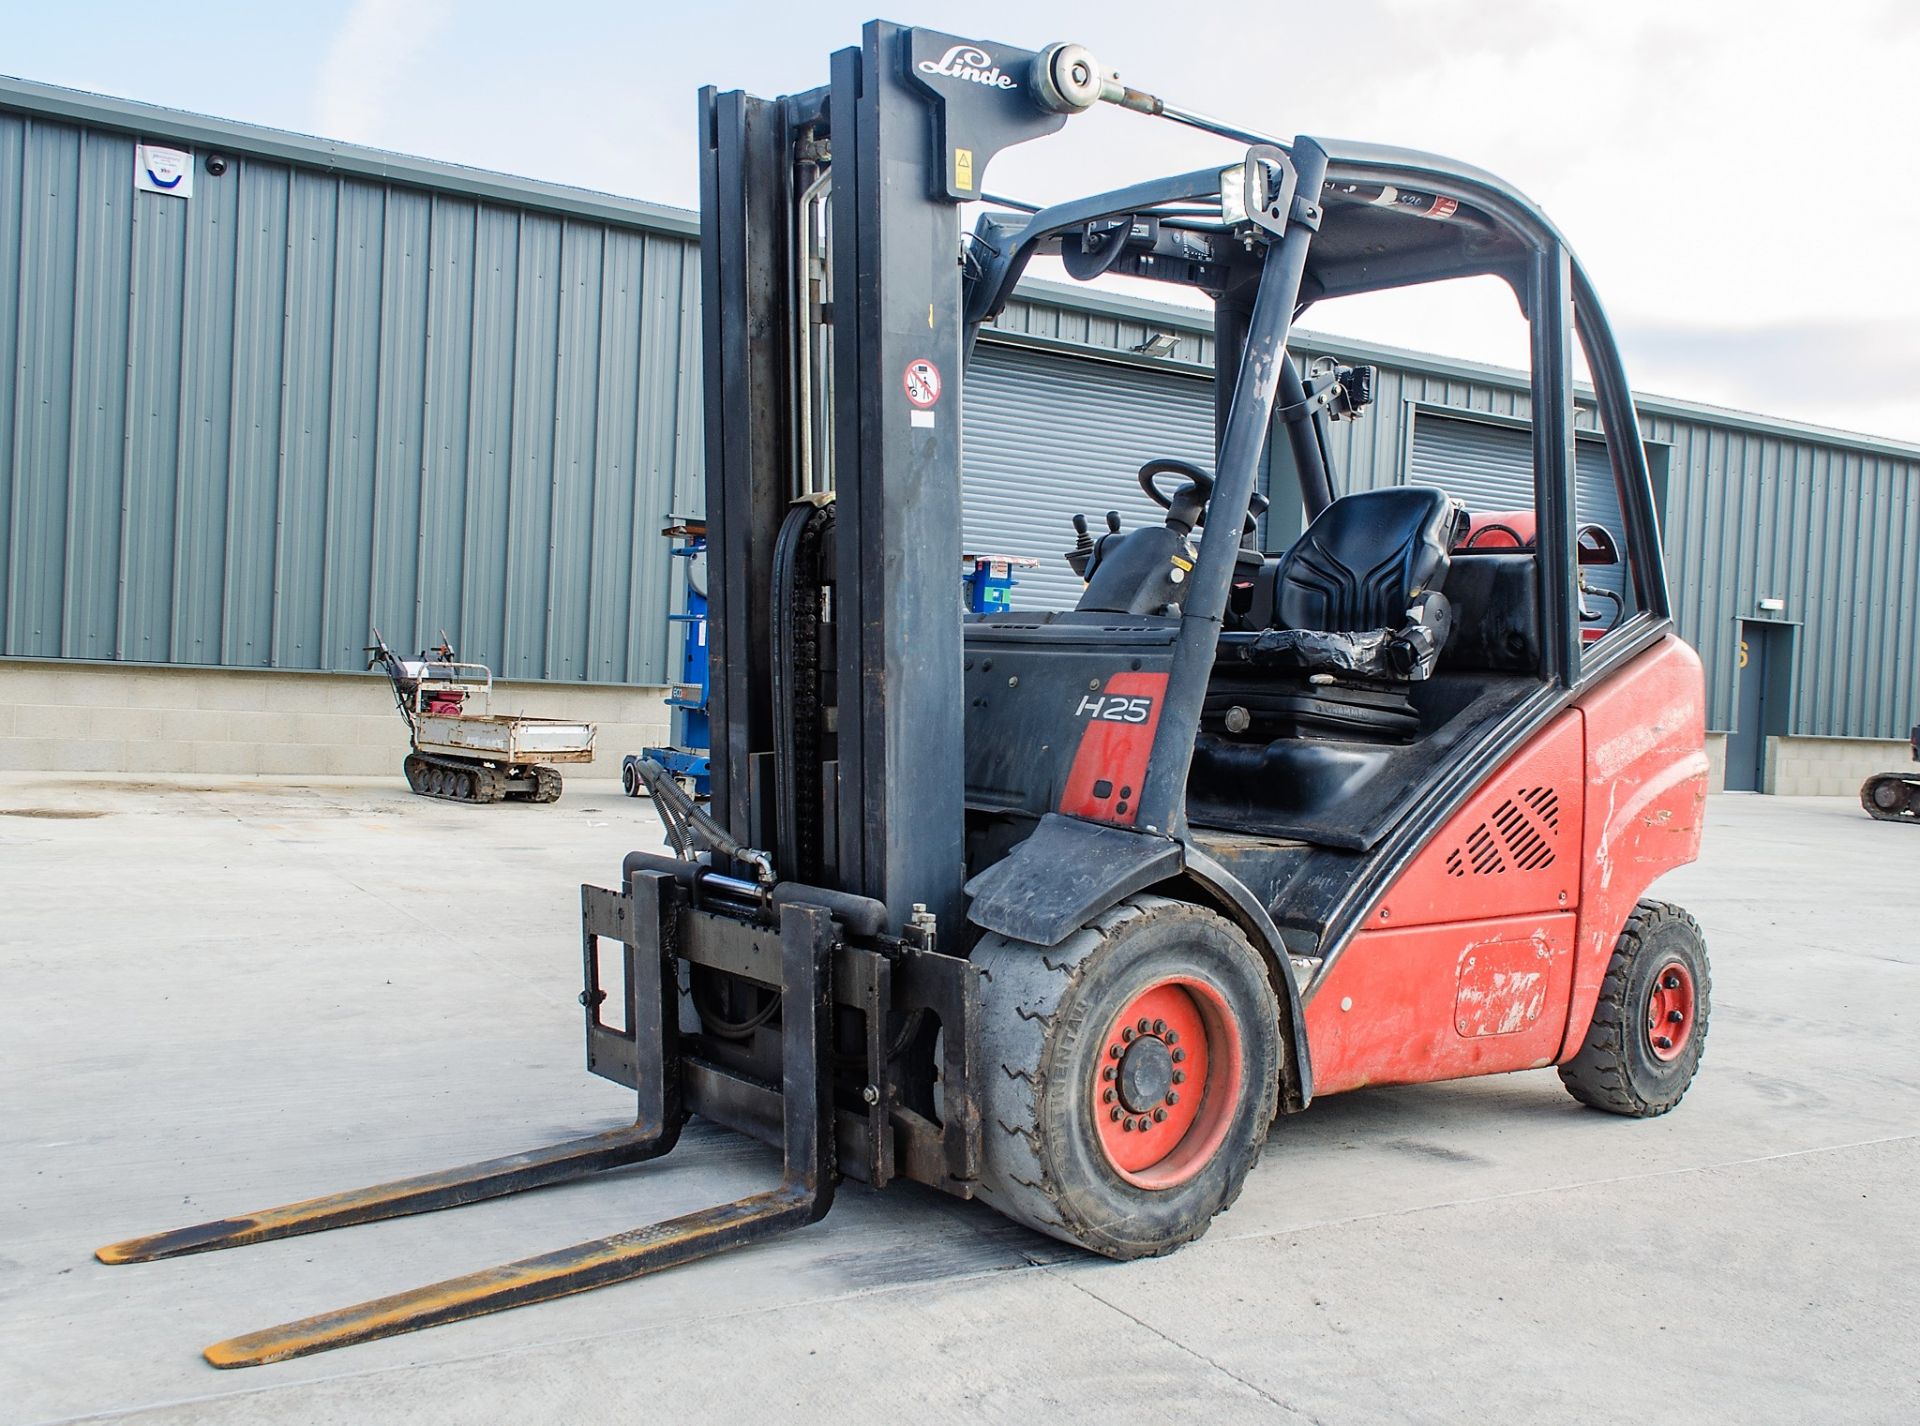 Linde H25T 2.5 tonne gas powered fork lift truck Year: 2008 S/N: H2X393WO6494 Recorded Hours: 4970